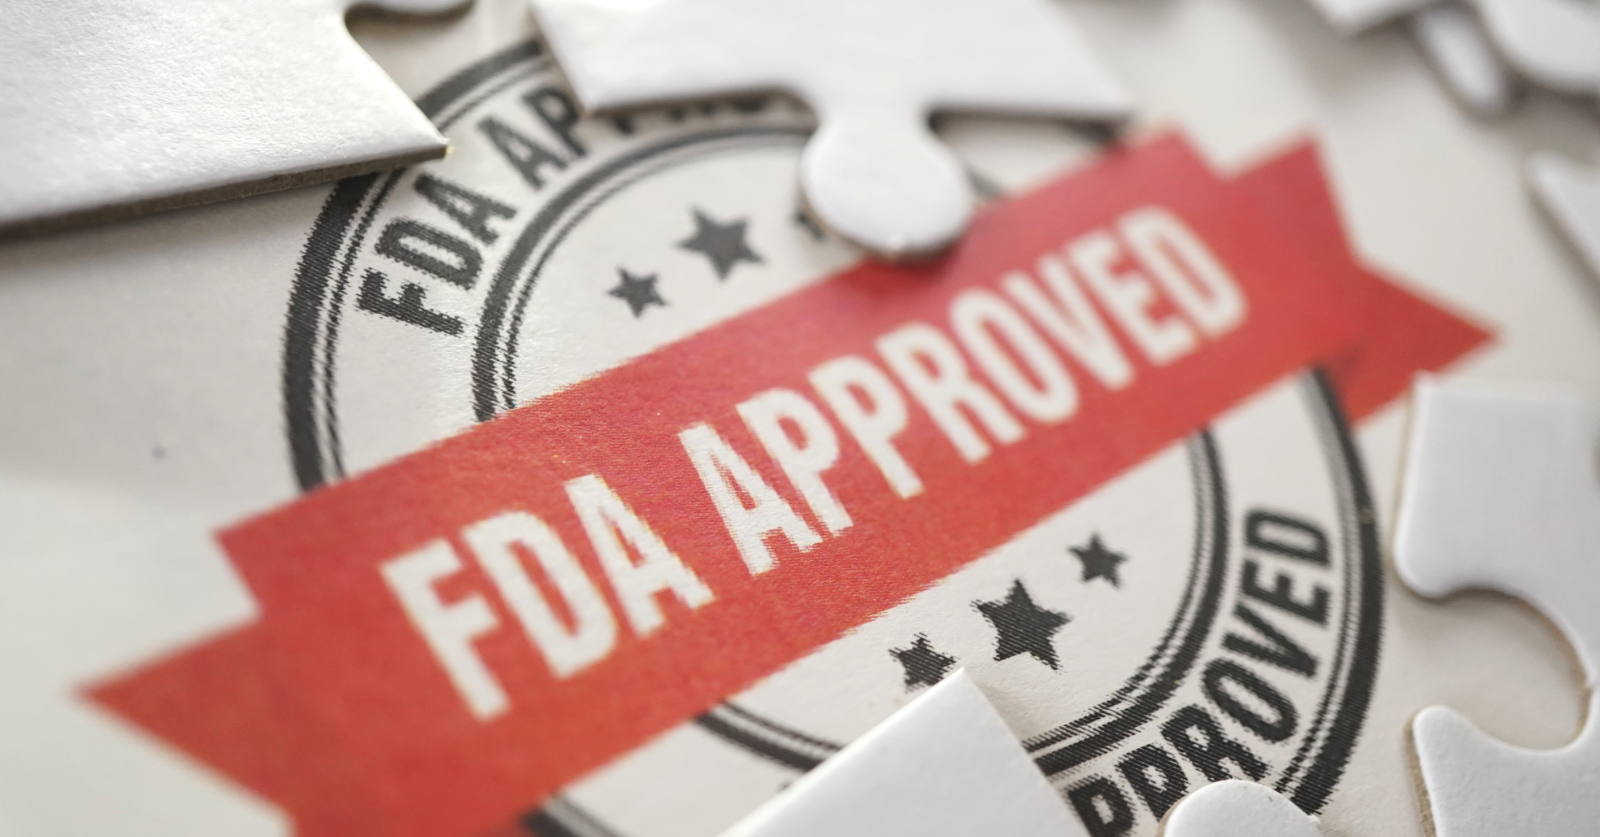 FDA approves first test to identify risk of developing opioid use disorder